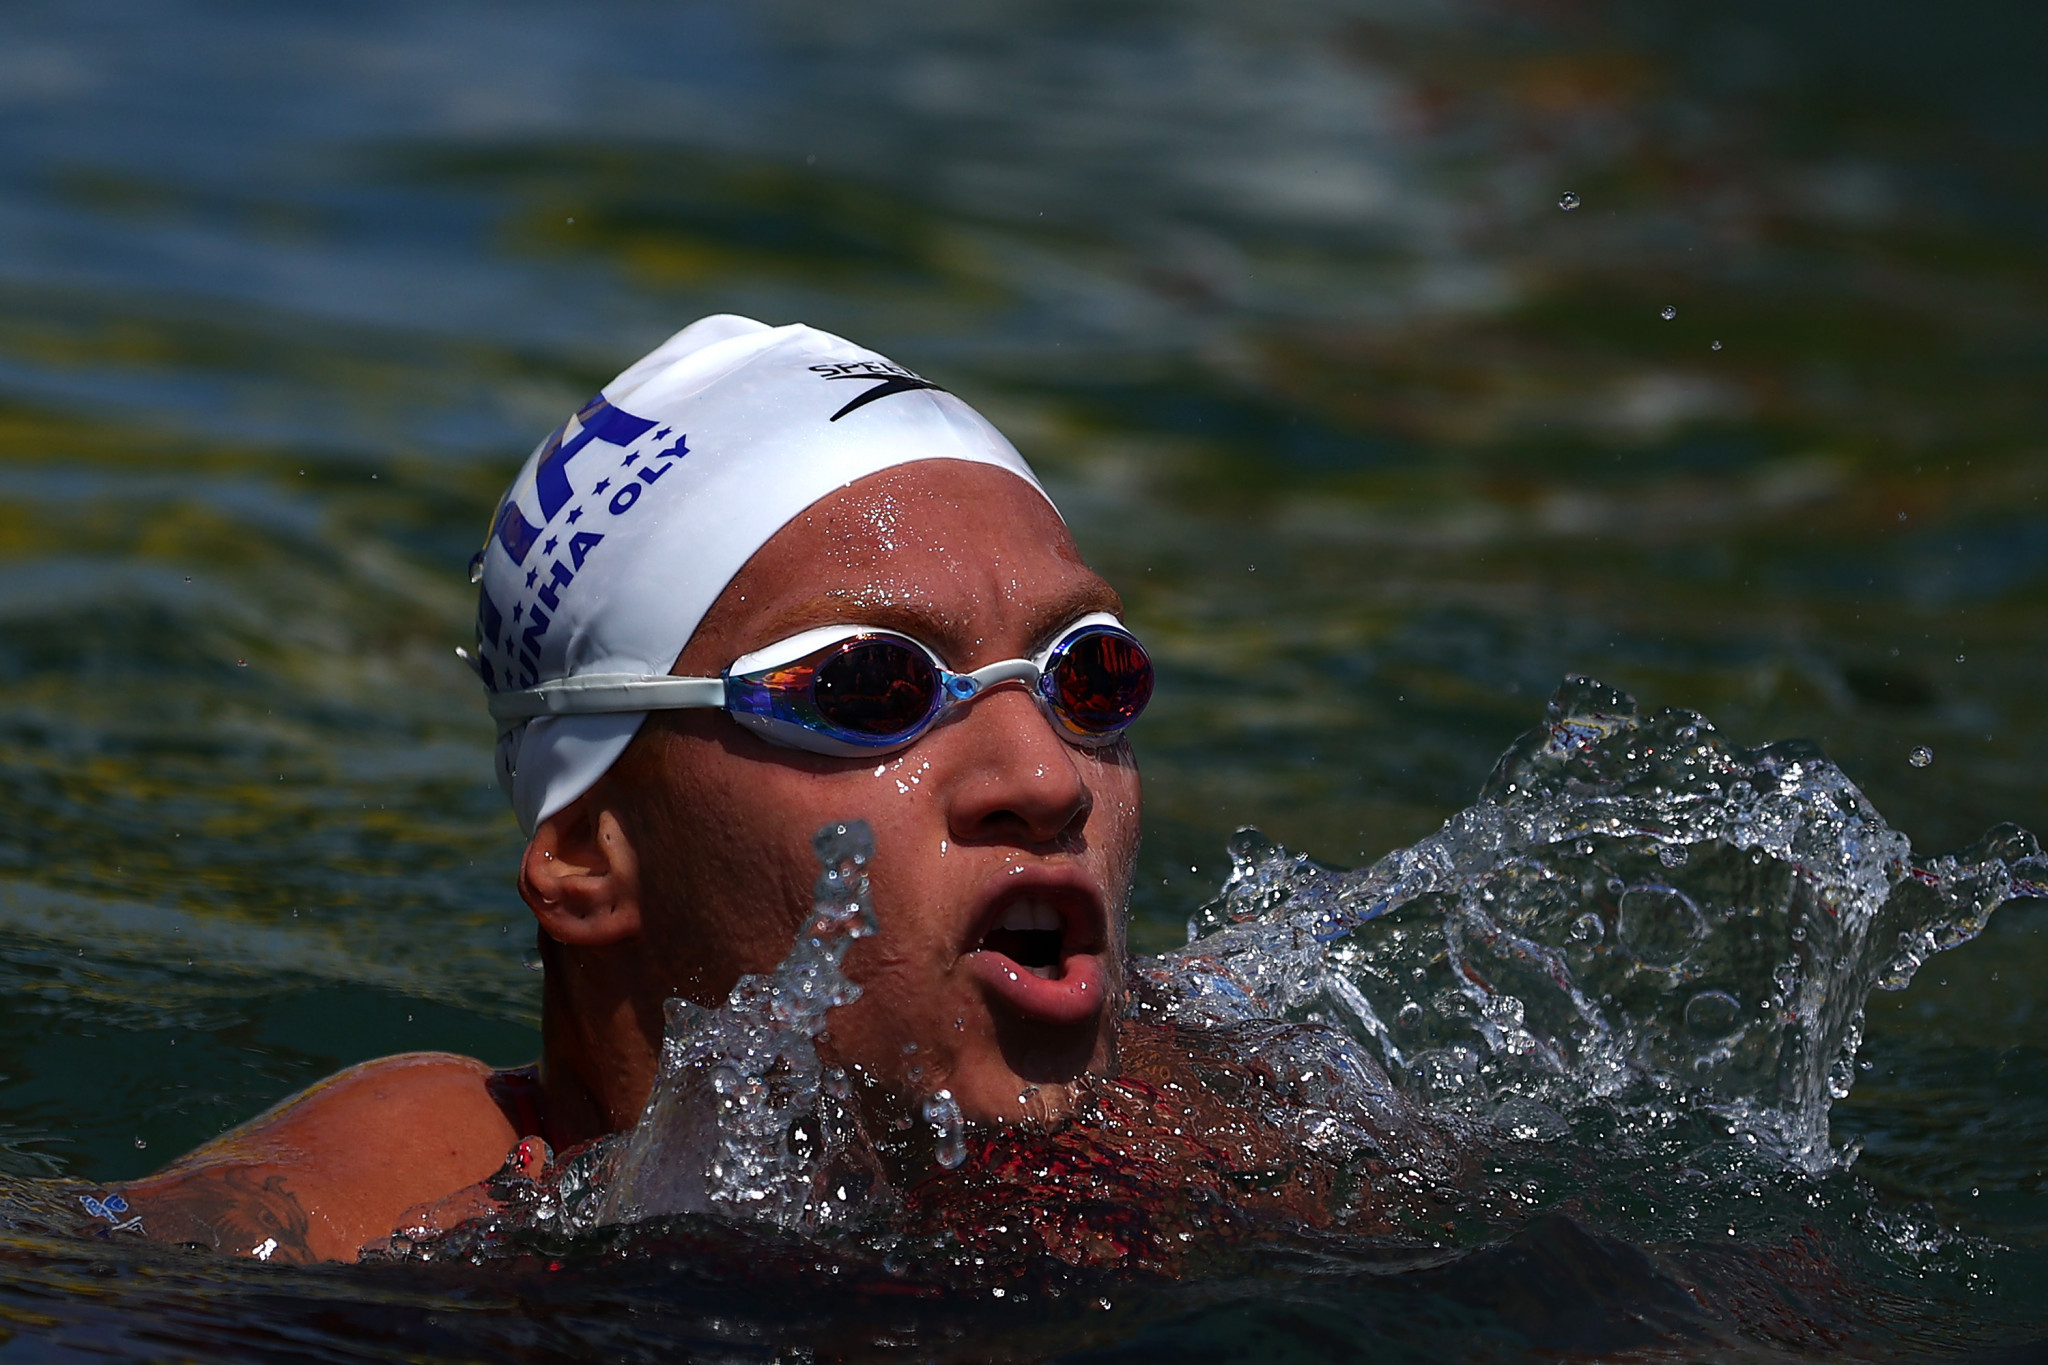 Ana Marcela Cunha of Brazil will start the FINA Open Water Tour, formerly known as the Marathon Swim World Series, as the defending women's champion ©Getty Images